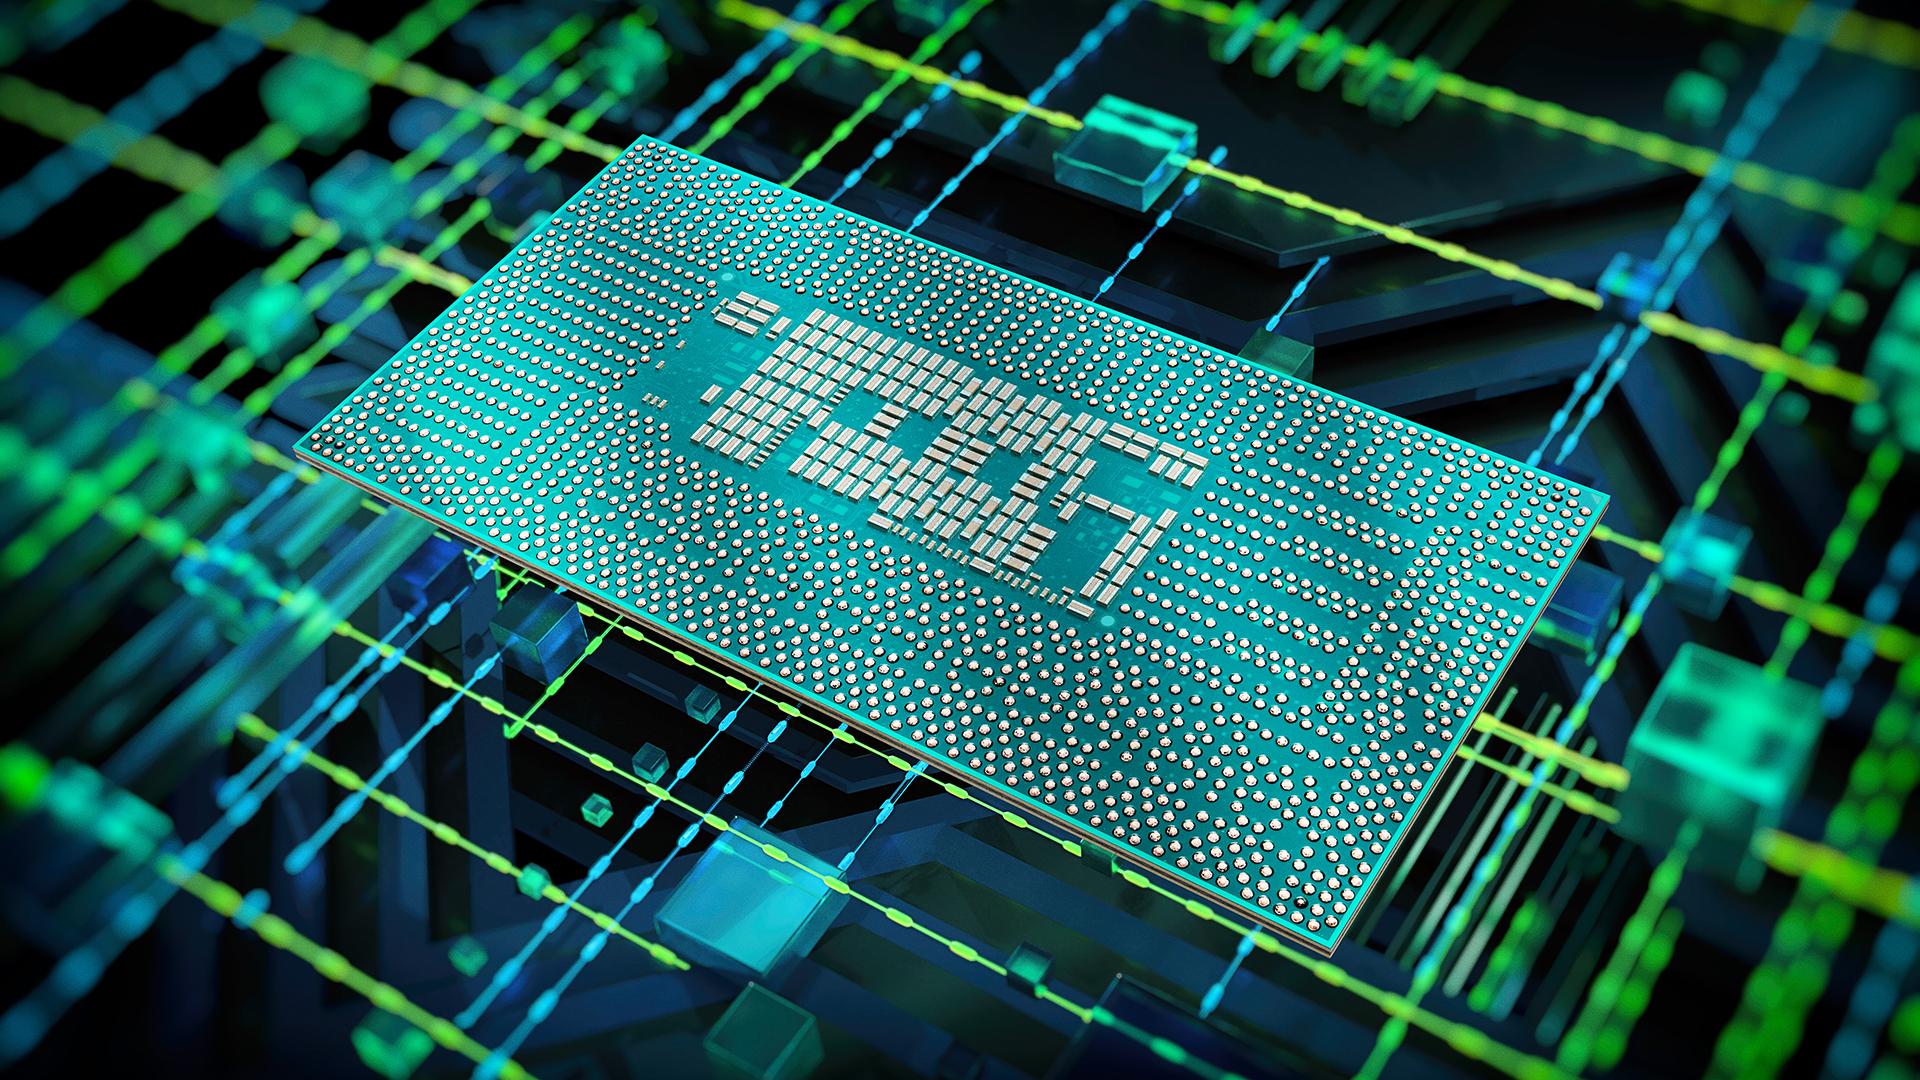 Ces Intel Engineers Fastest Mobile Processor Ever With 12th Gen Intel Core Mobile